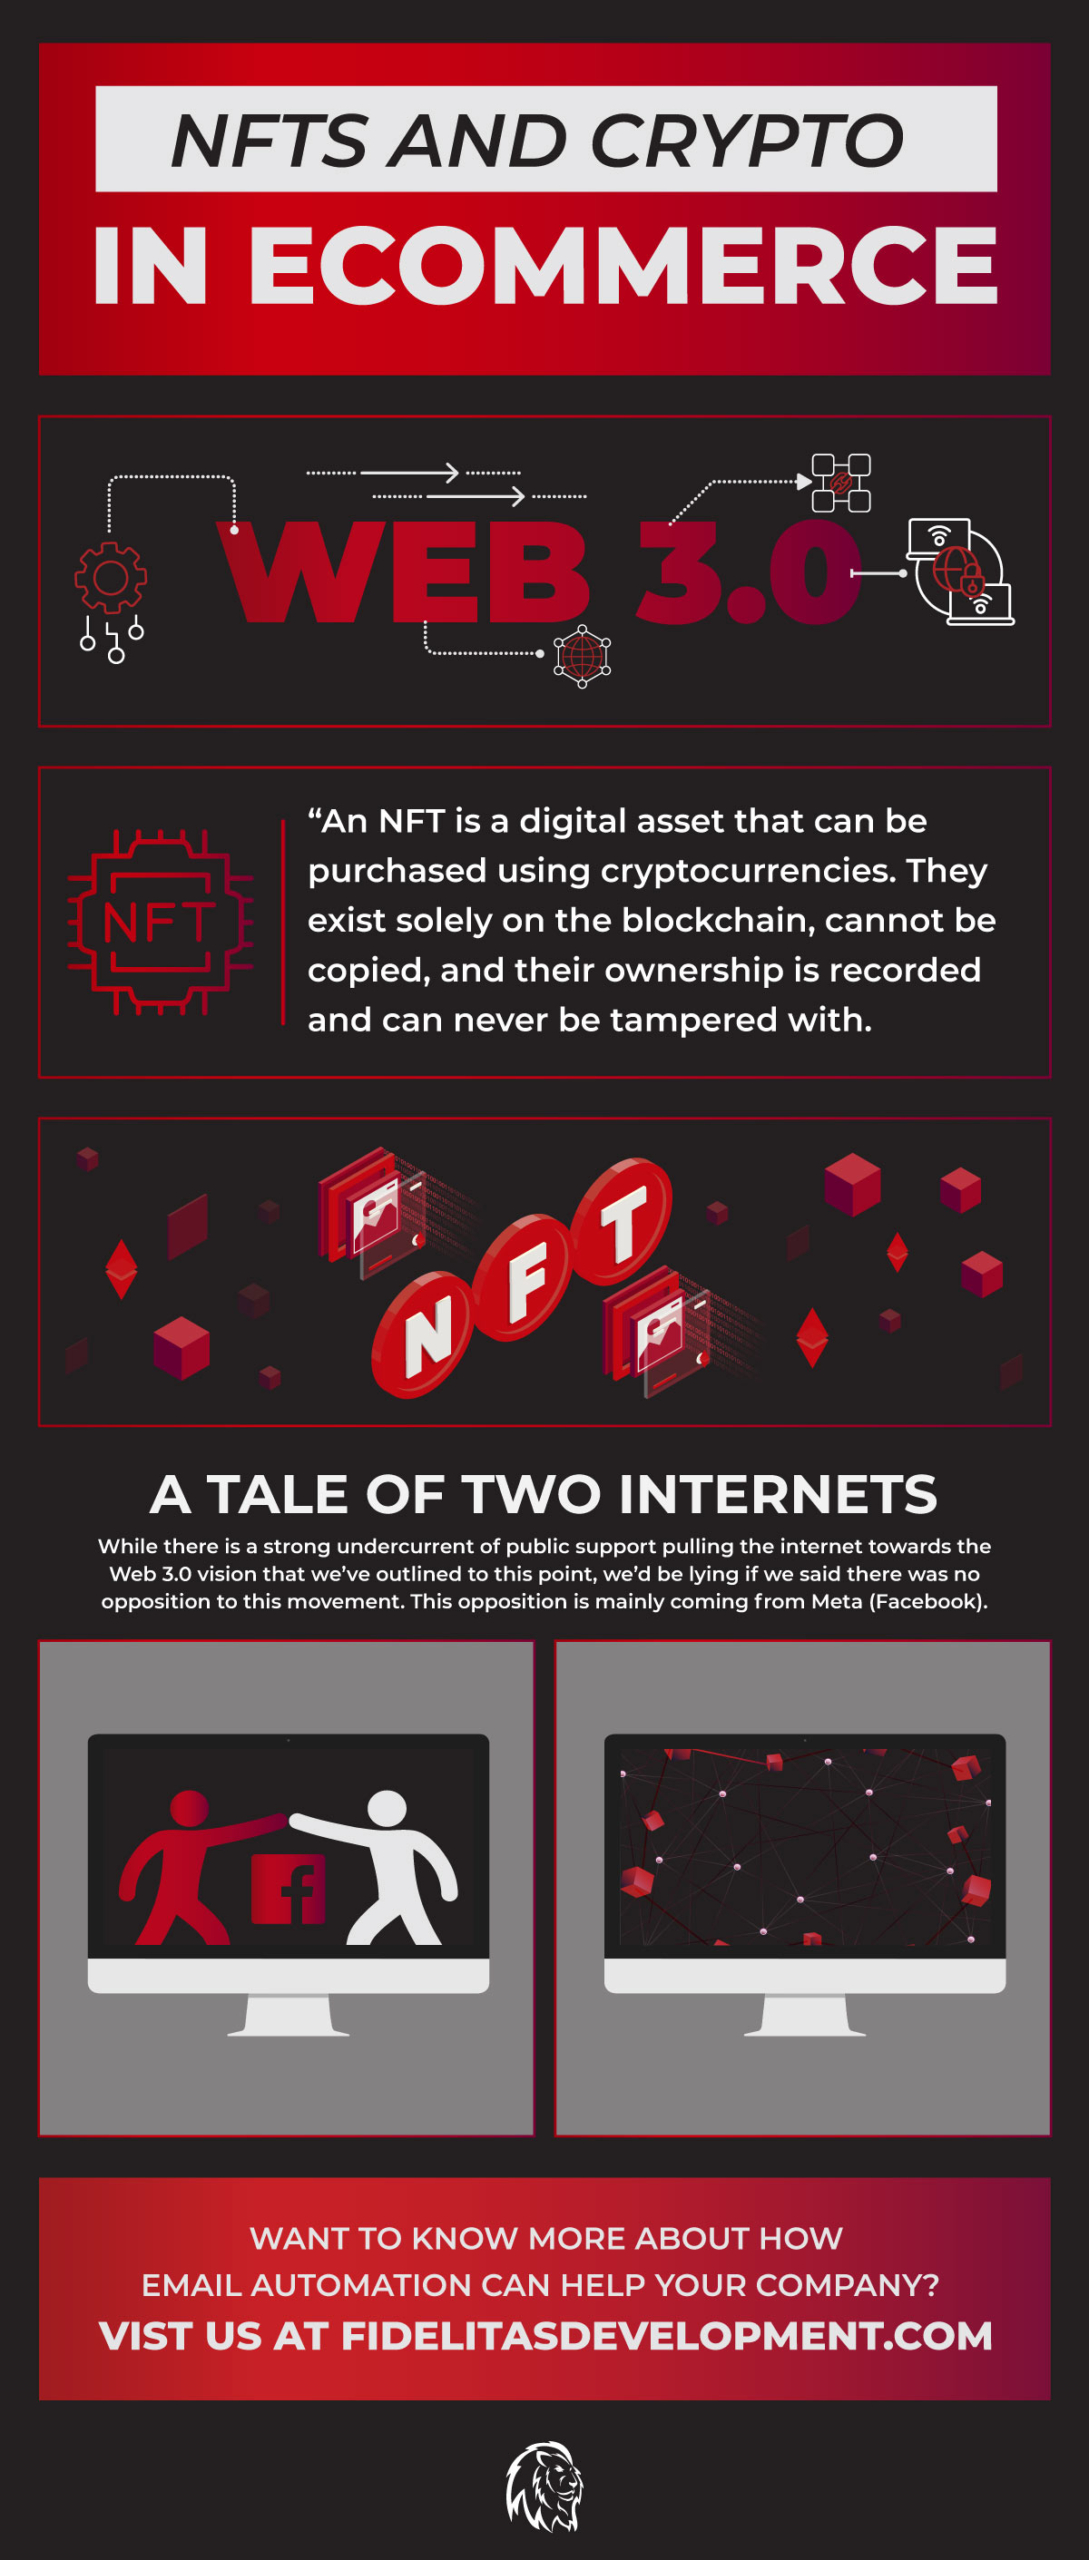 nfts and crypto in ecommerce infographic